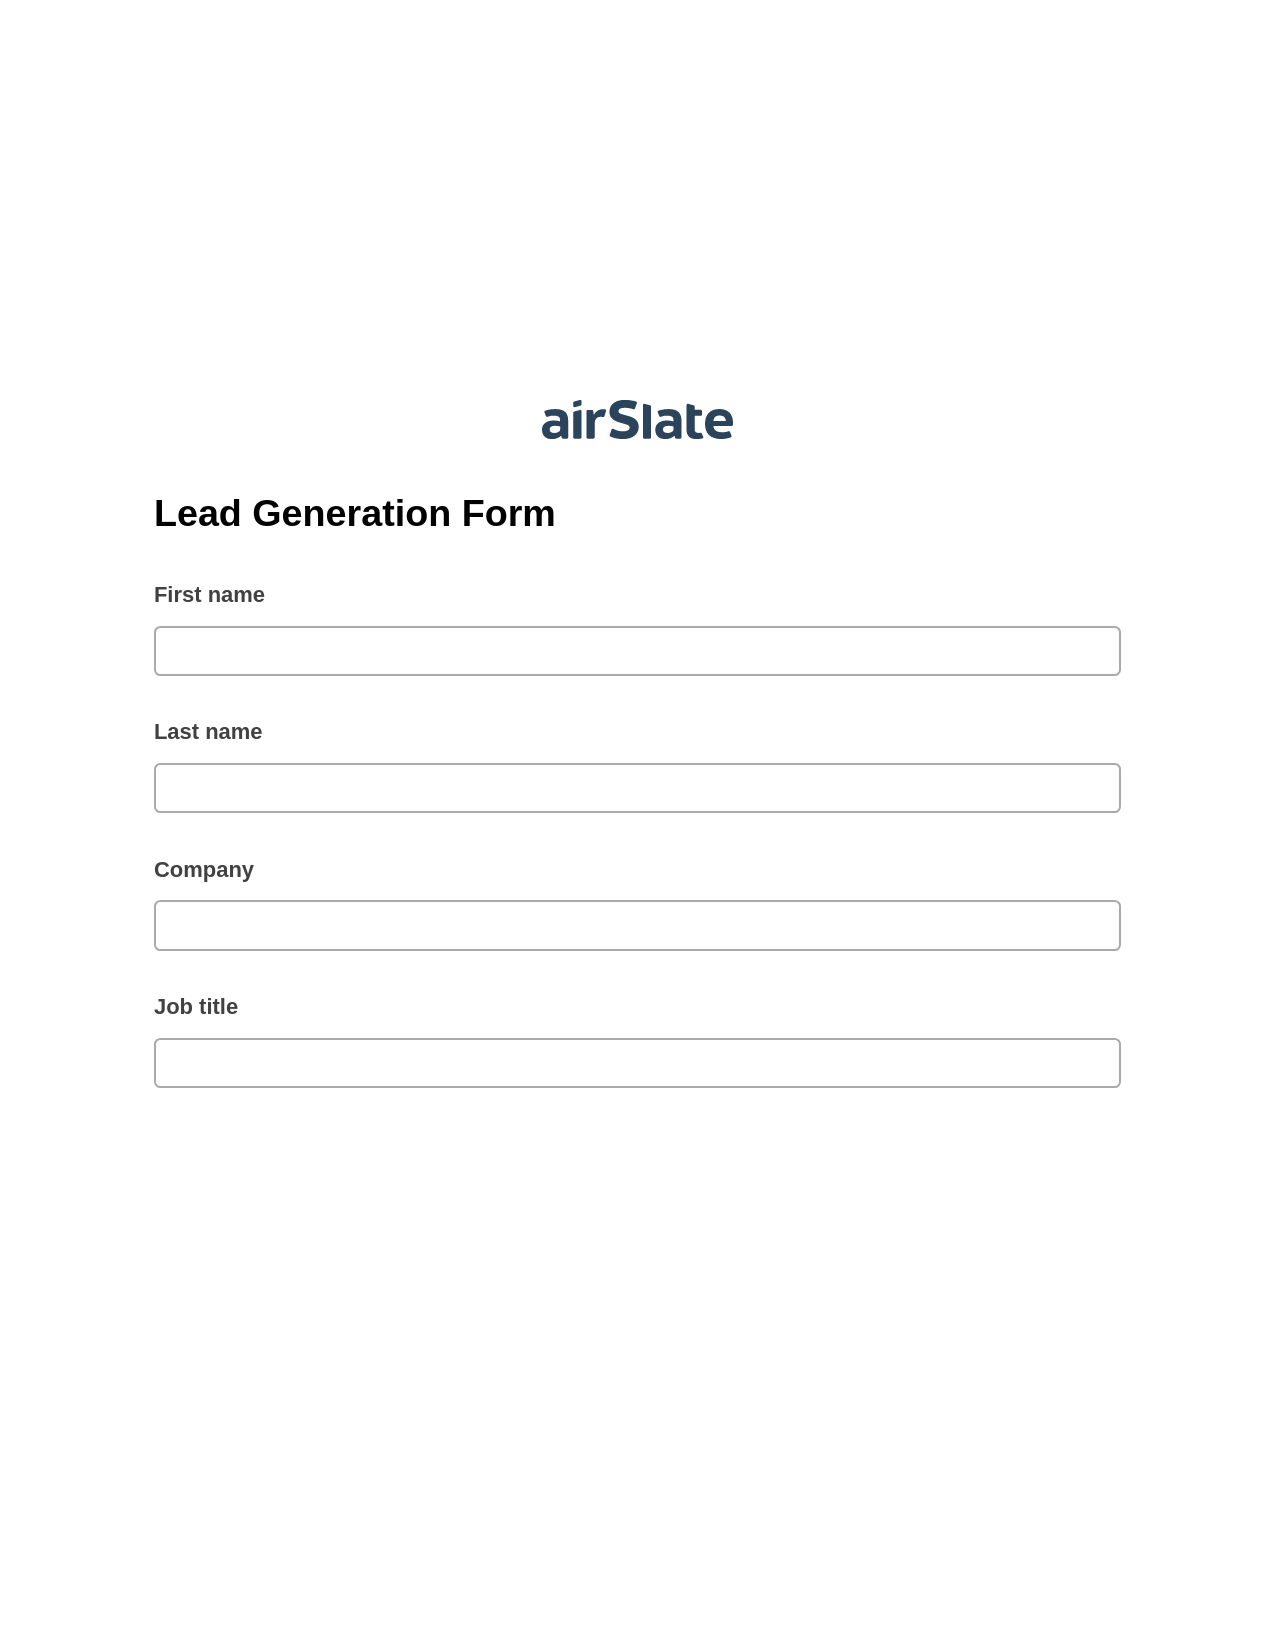 Lead Generation Form Pre-fill from Google Sheets Bot, Roles Reminder Bot, Export to Google Sheet Bot